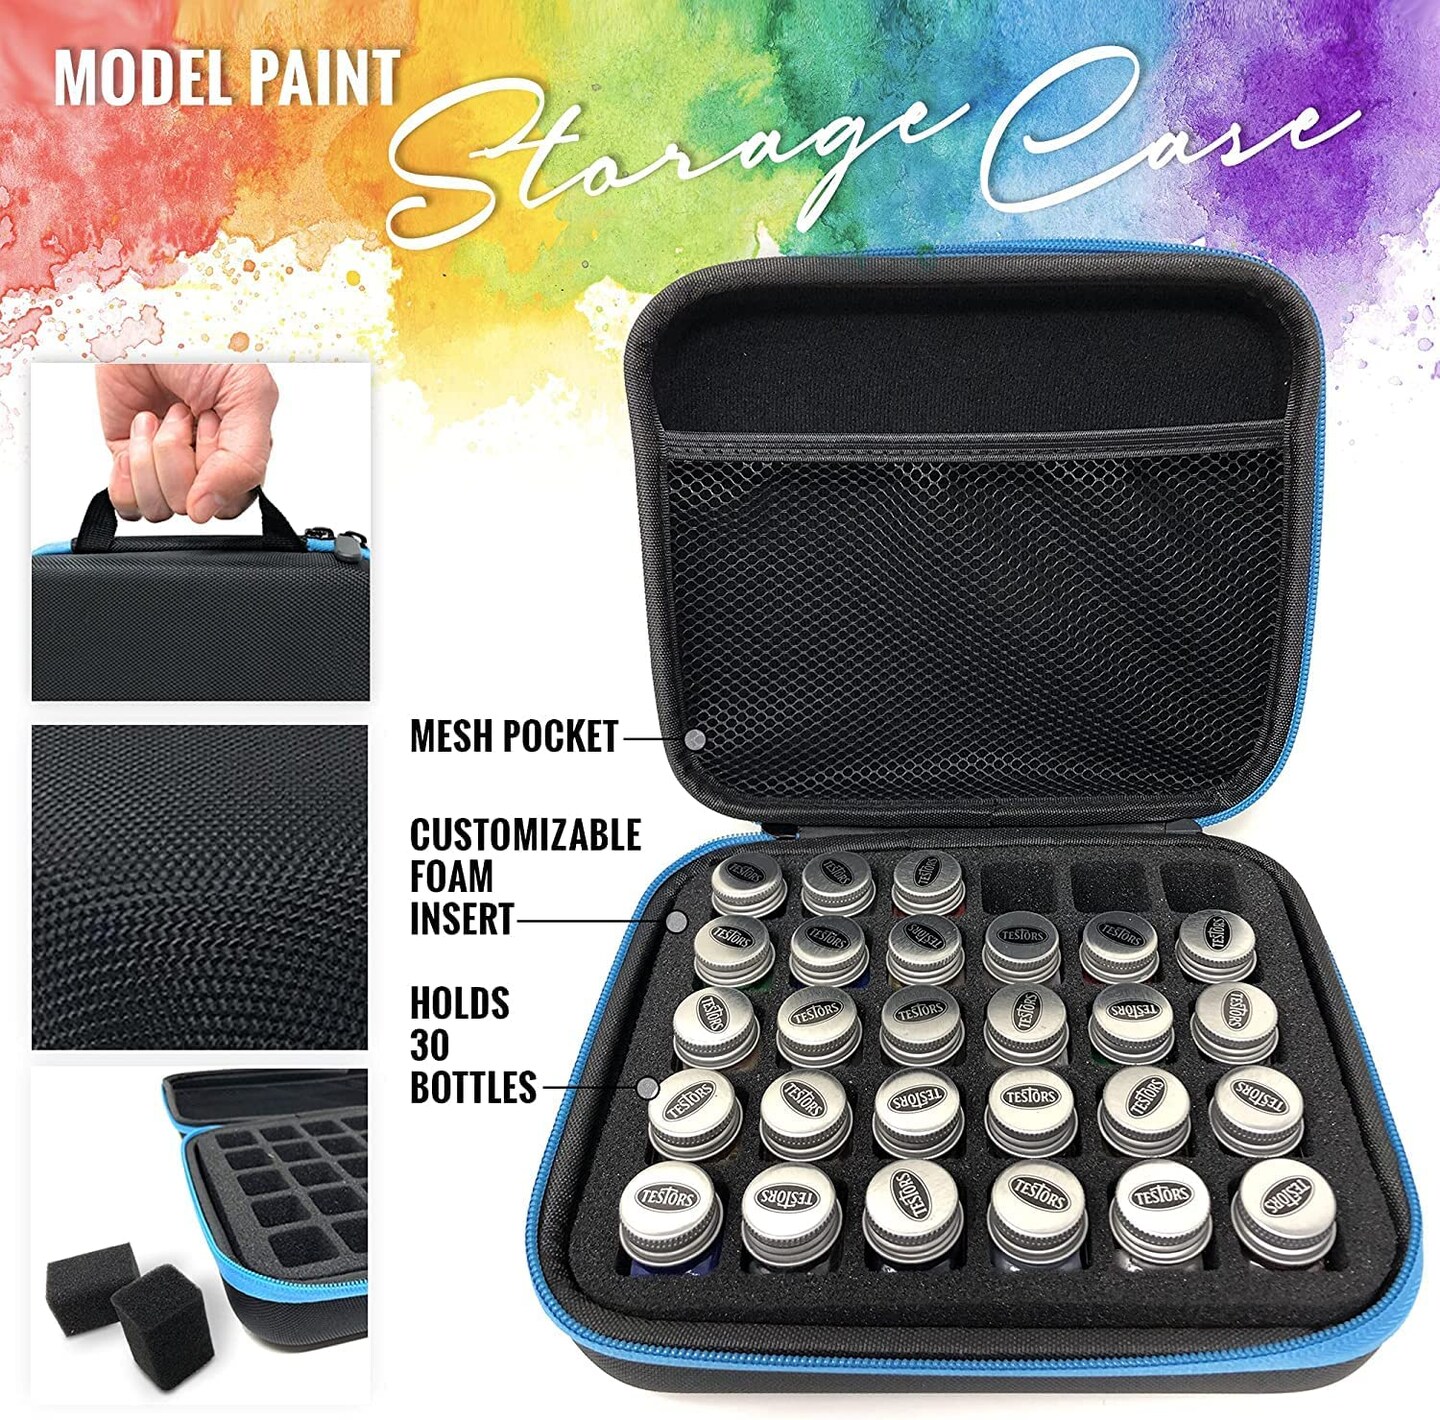 Pixiss Model Paint Storage Case for Testor Paints and Model Accessory Kit